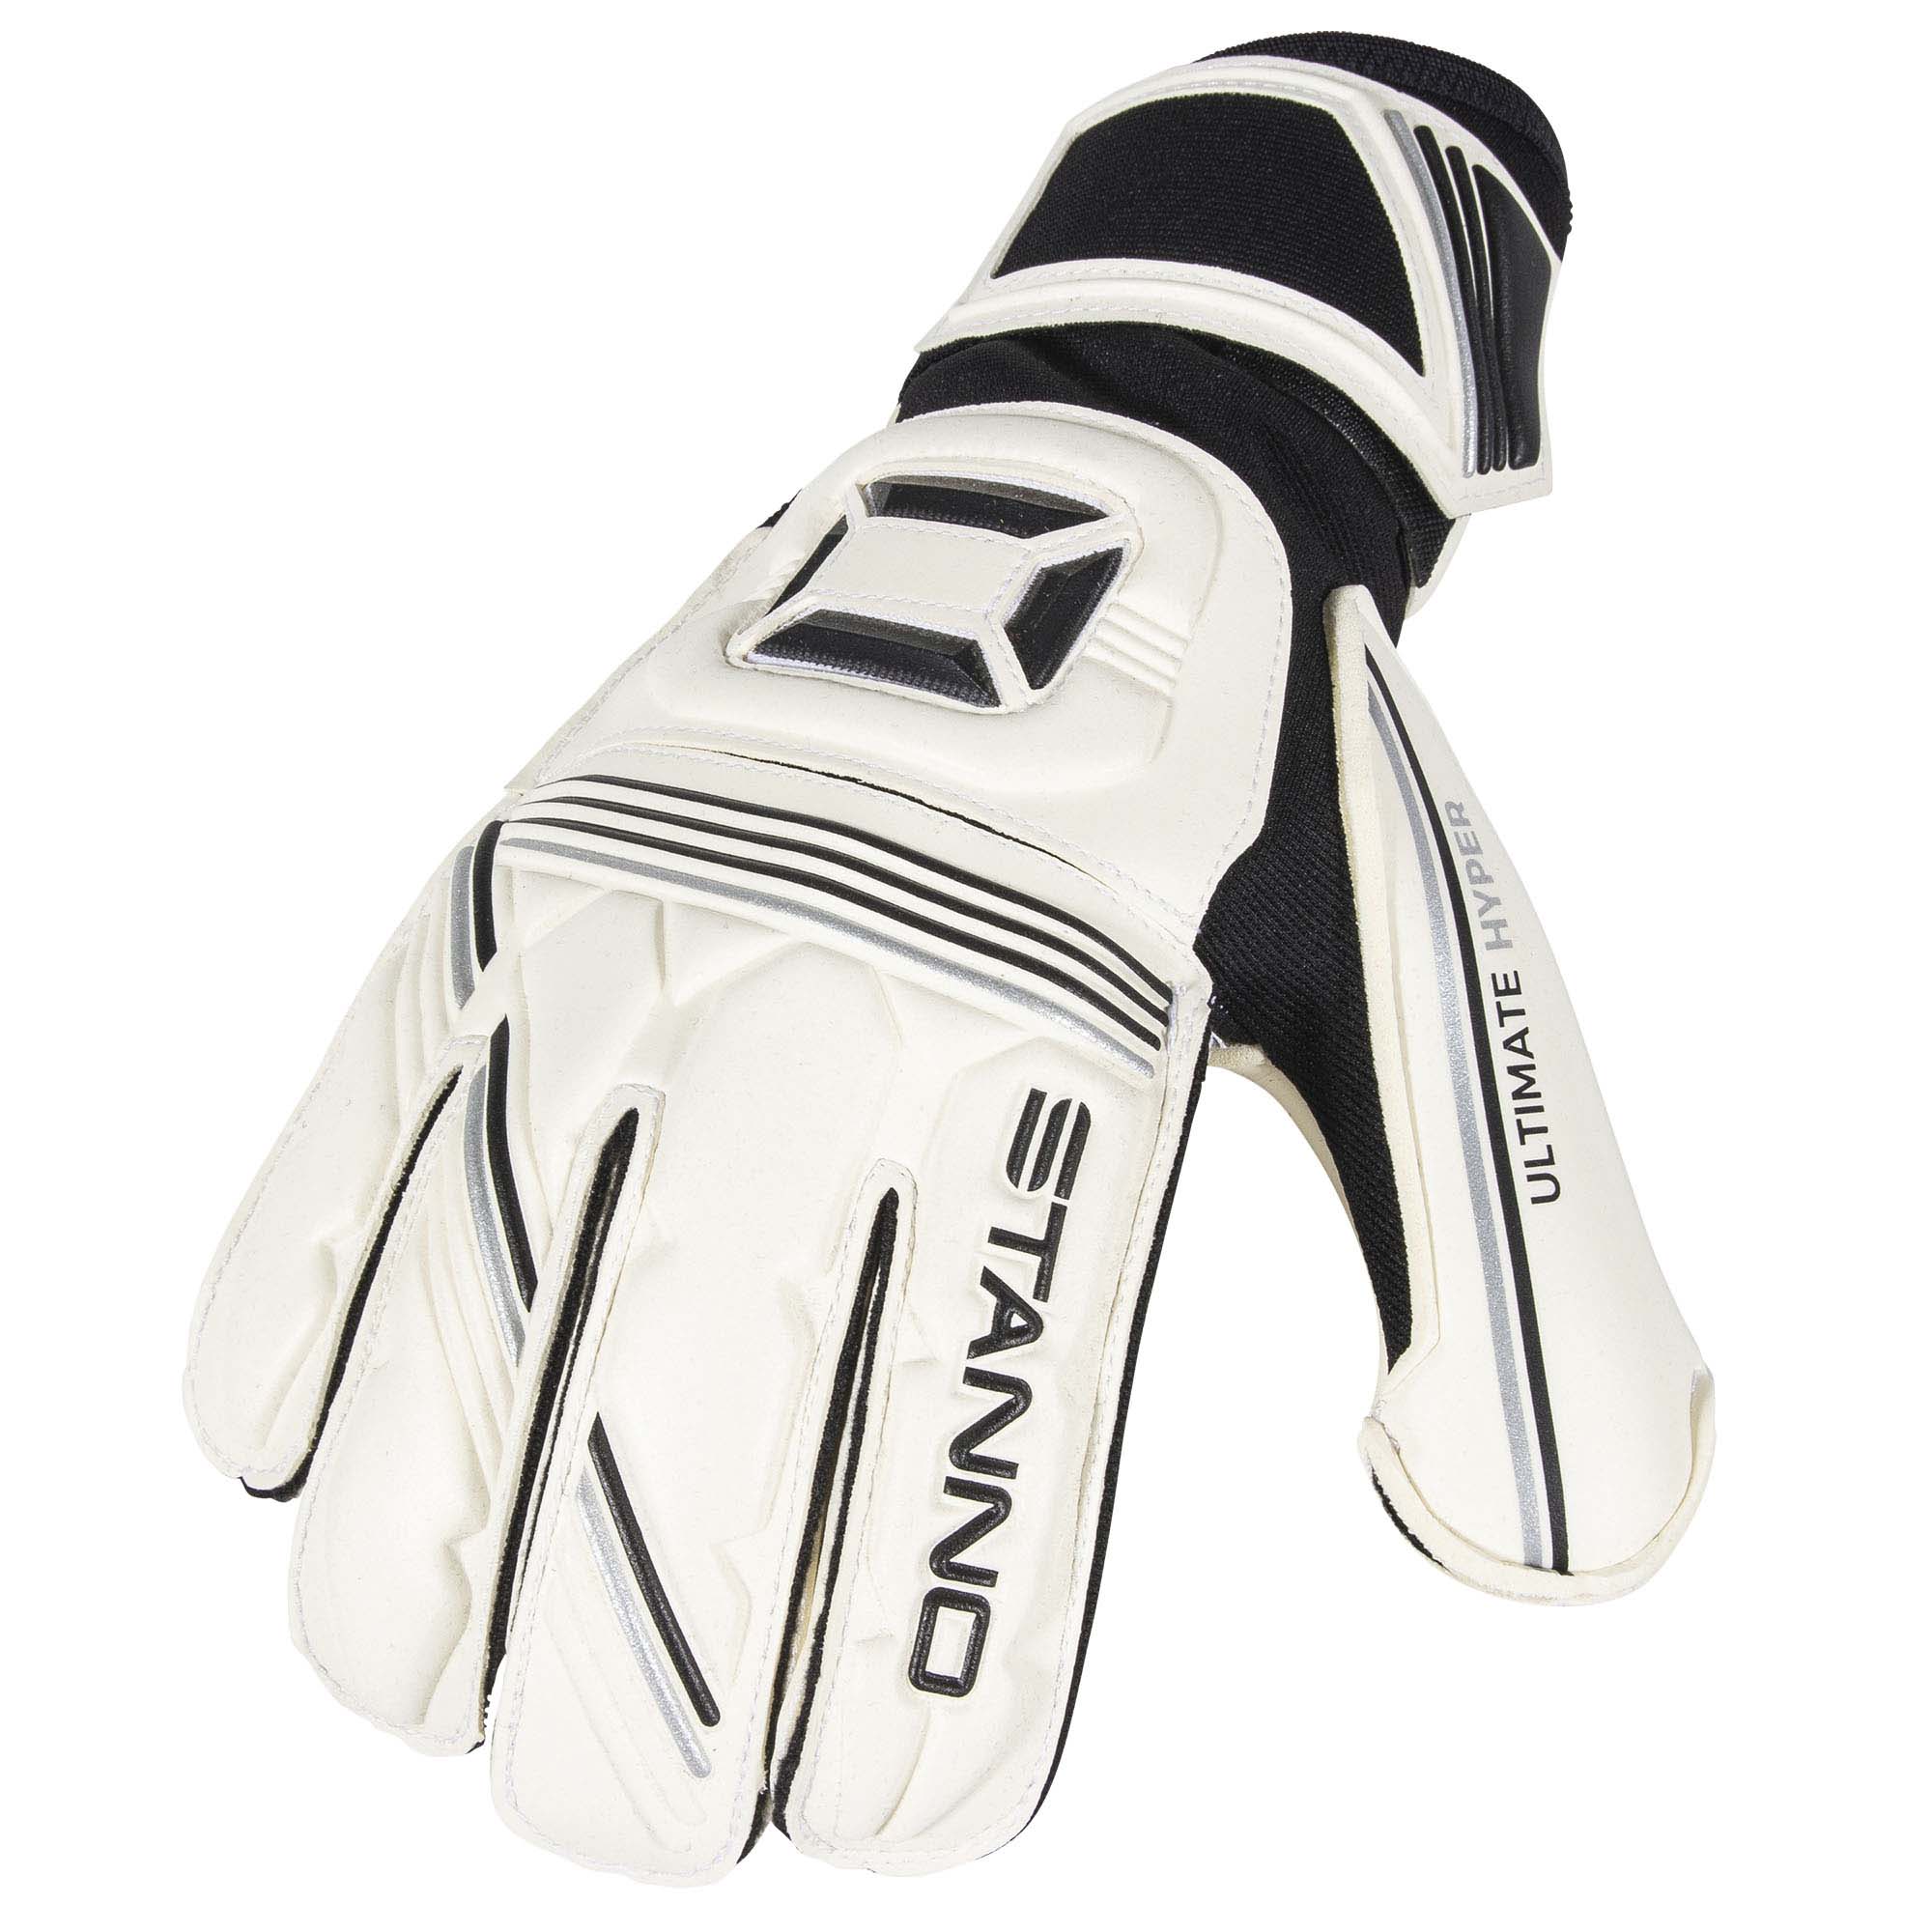 STANNO Ultimate Grip Hyper Ll